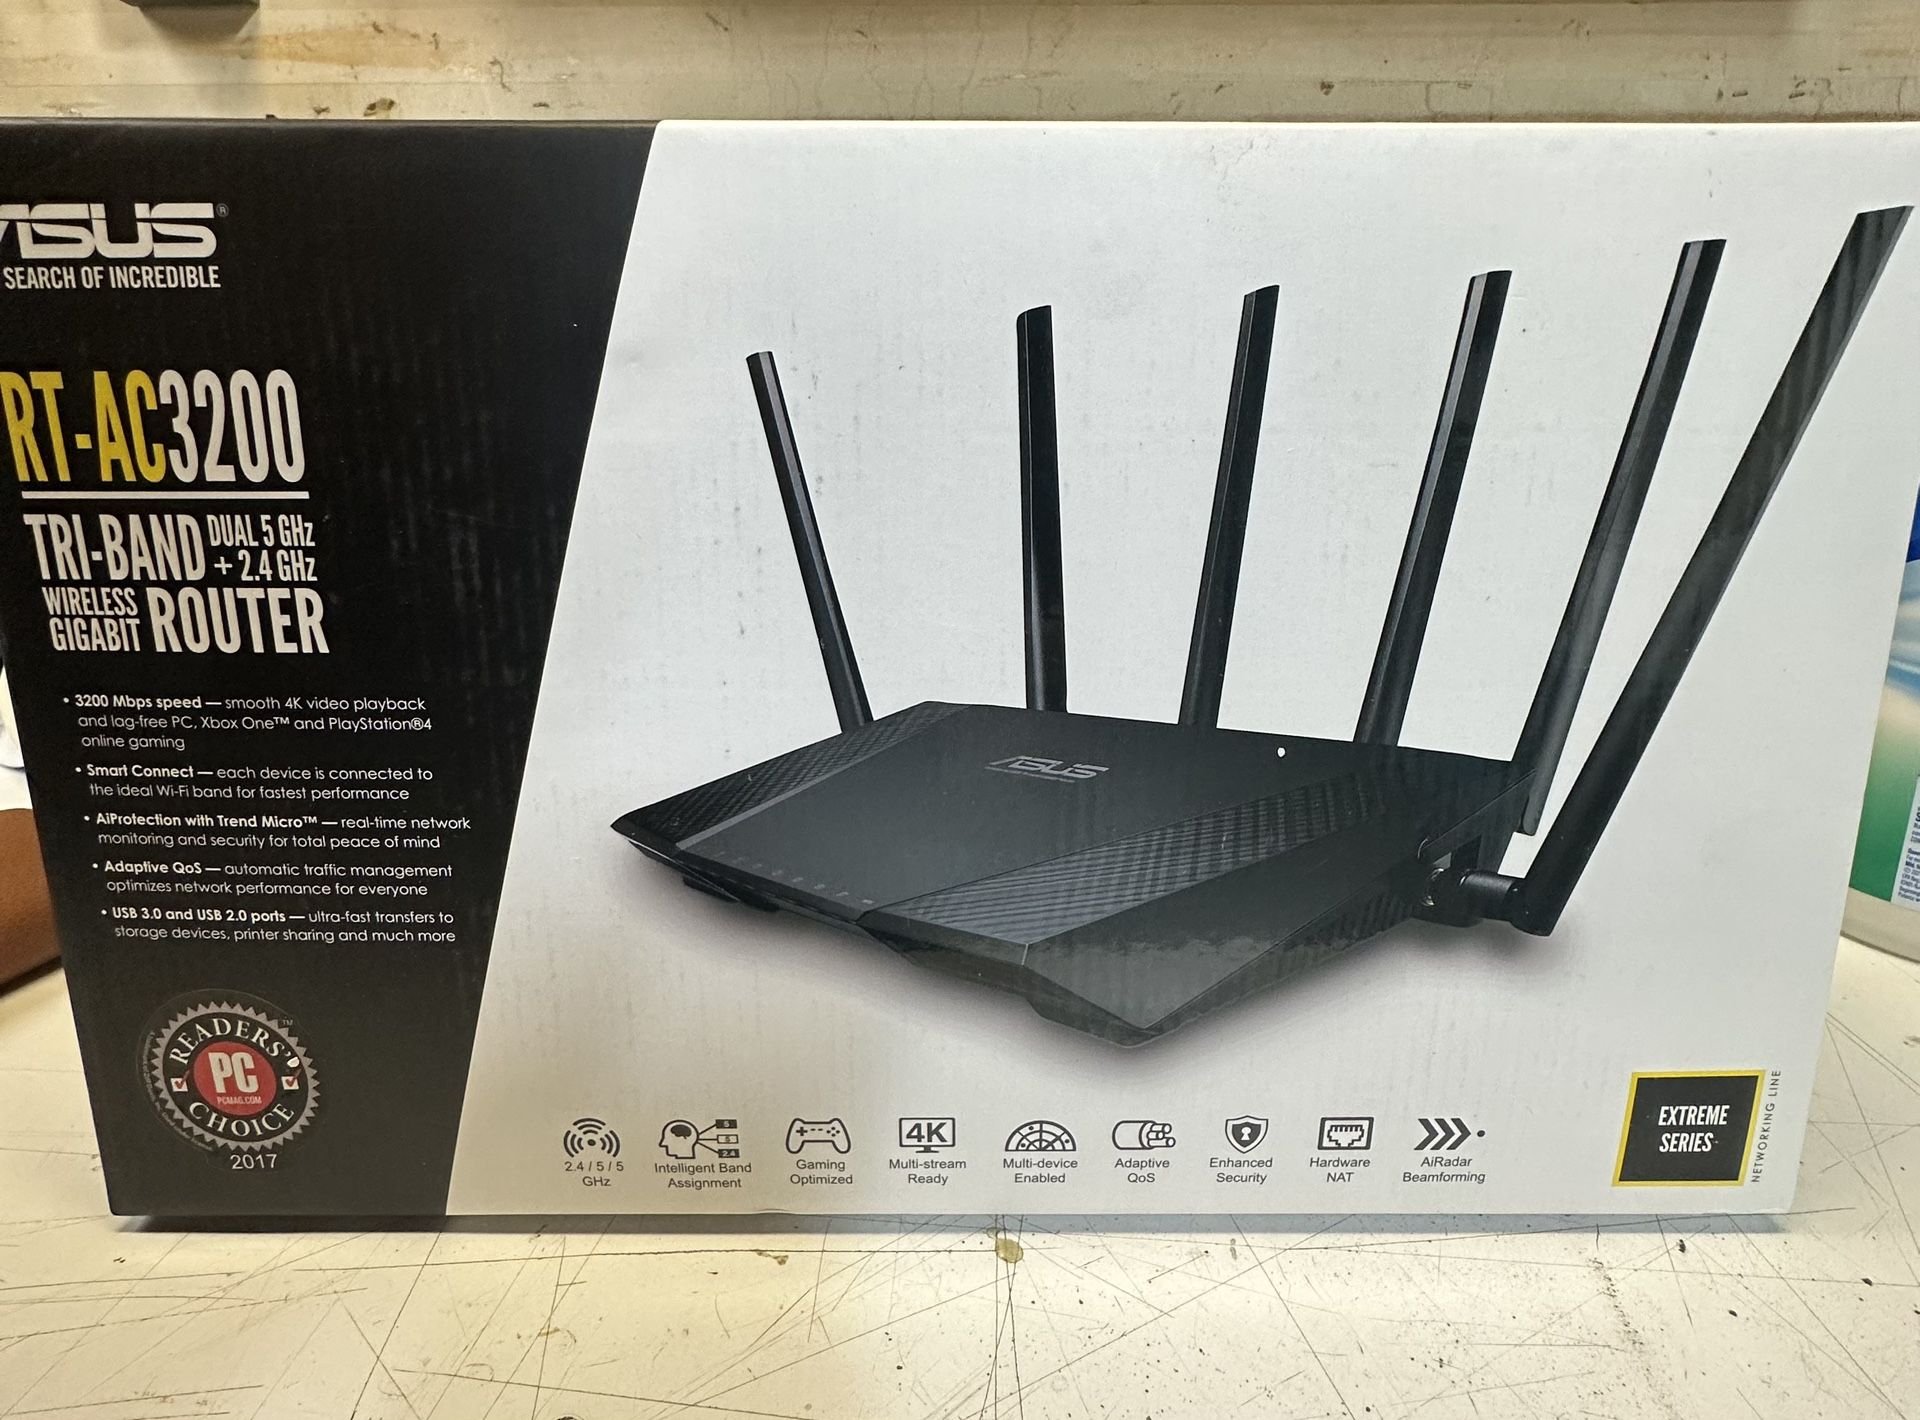 Router Asus RT-AC3200